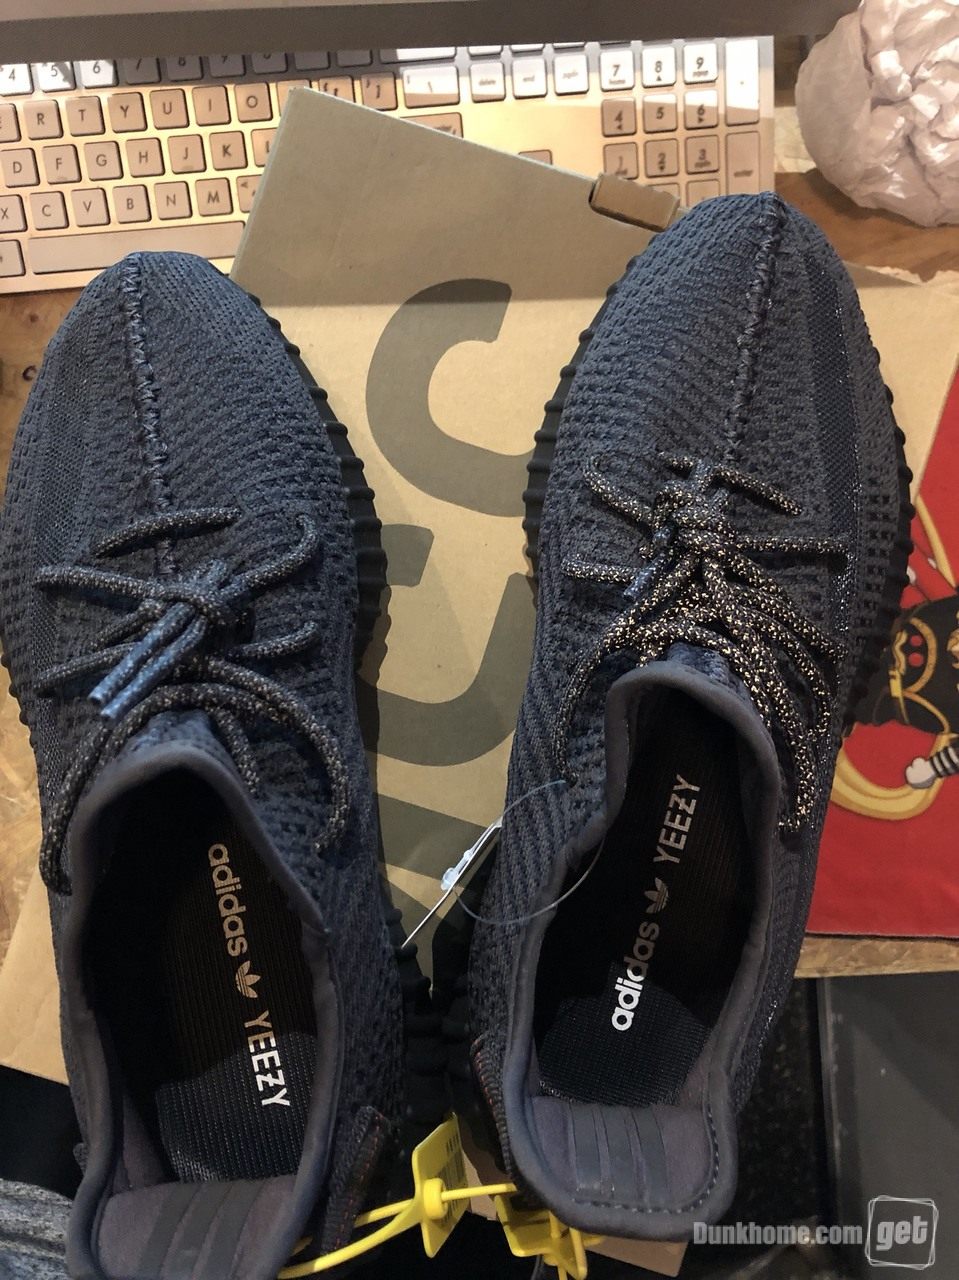 Cheap Adidas Yeezy Boost 350 V2 Dazzling Blue 2022 Gy7164 Menaposs Size 10 New In Hand